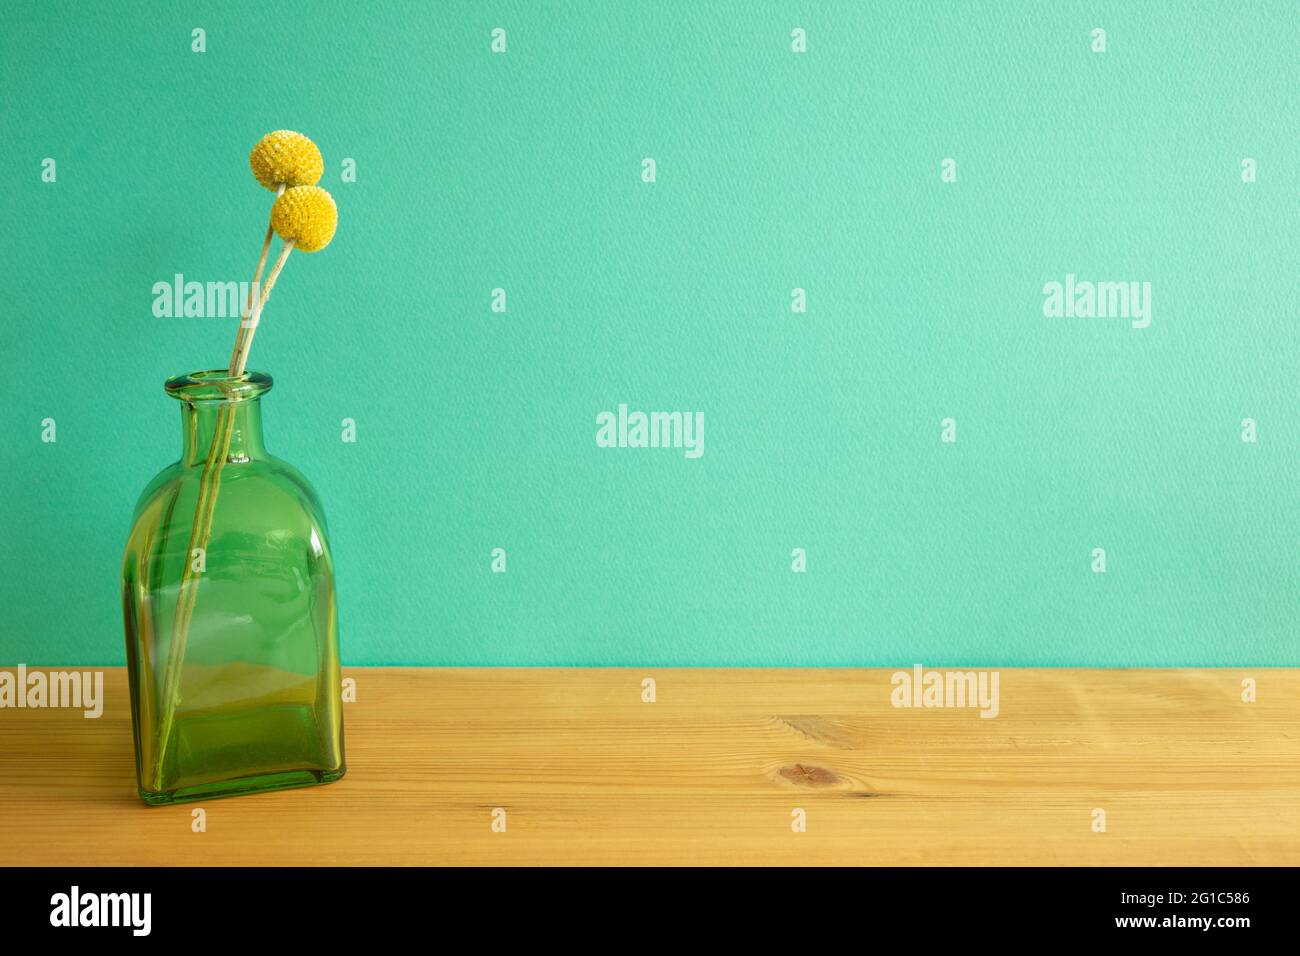 Vase of yellow Craspedia dry flowers on wooden table. mint green wall background Stock Photo